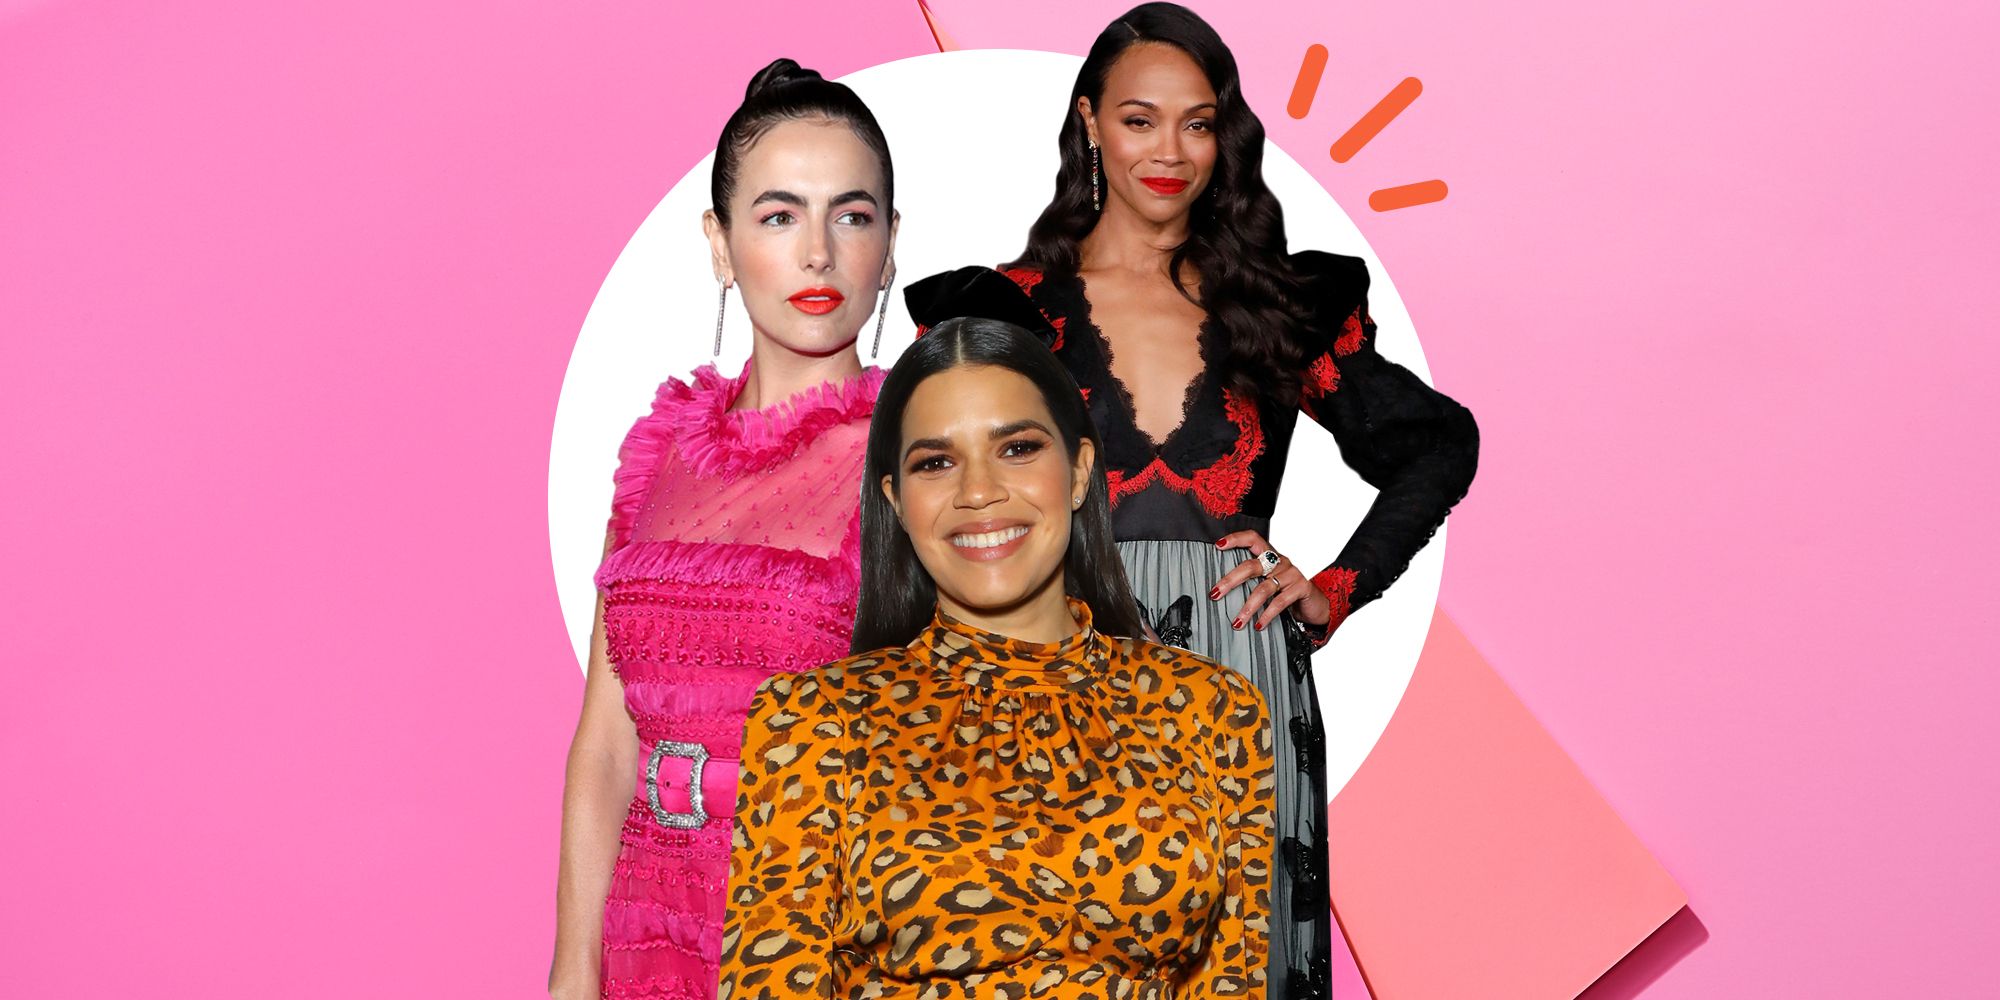 55 Latina And Hispanic Actresses You Should Know In 2022 pic